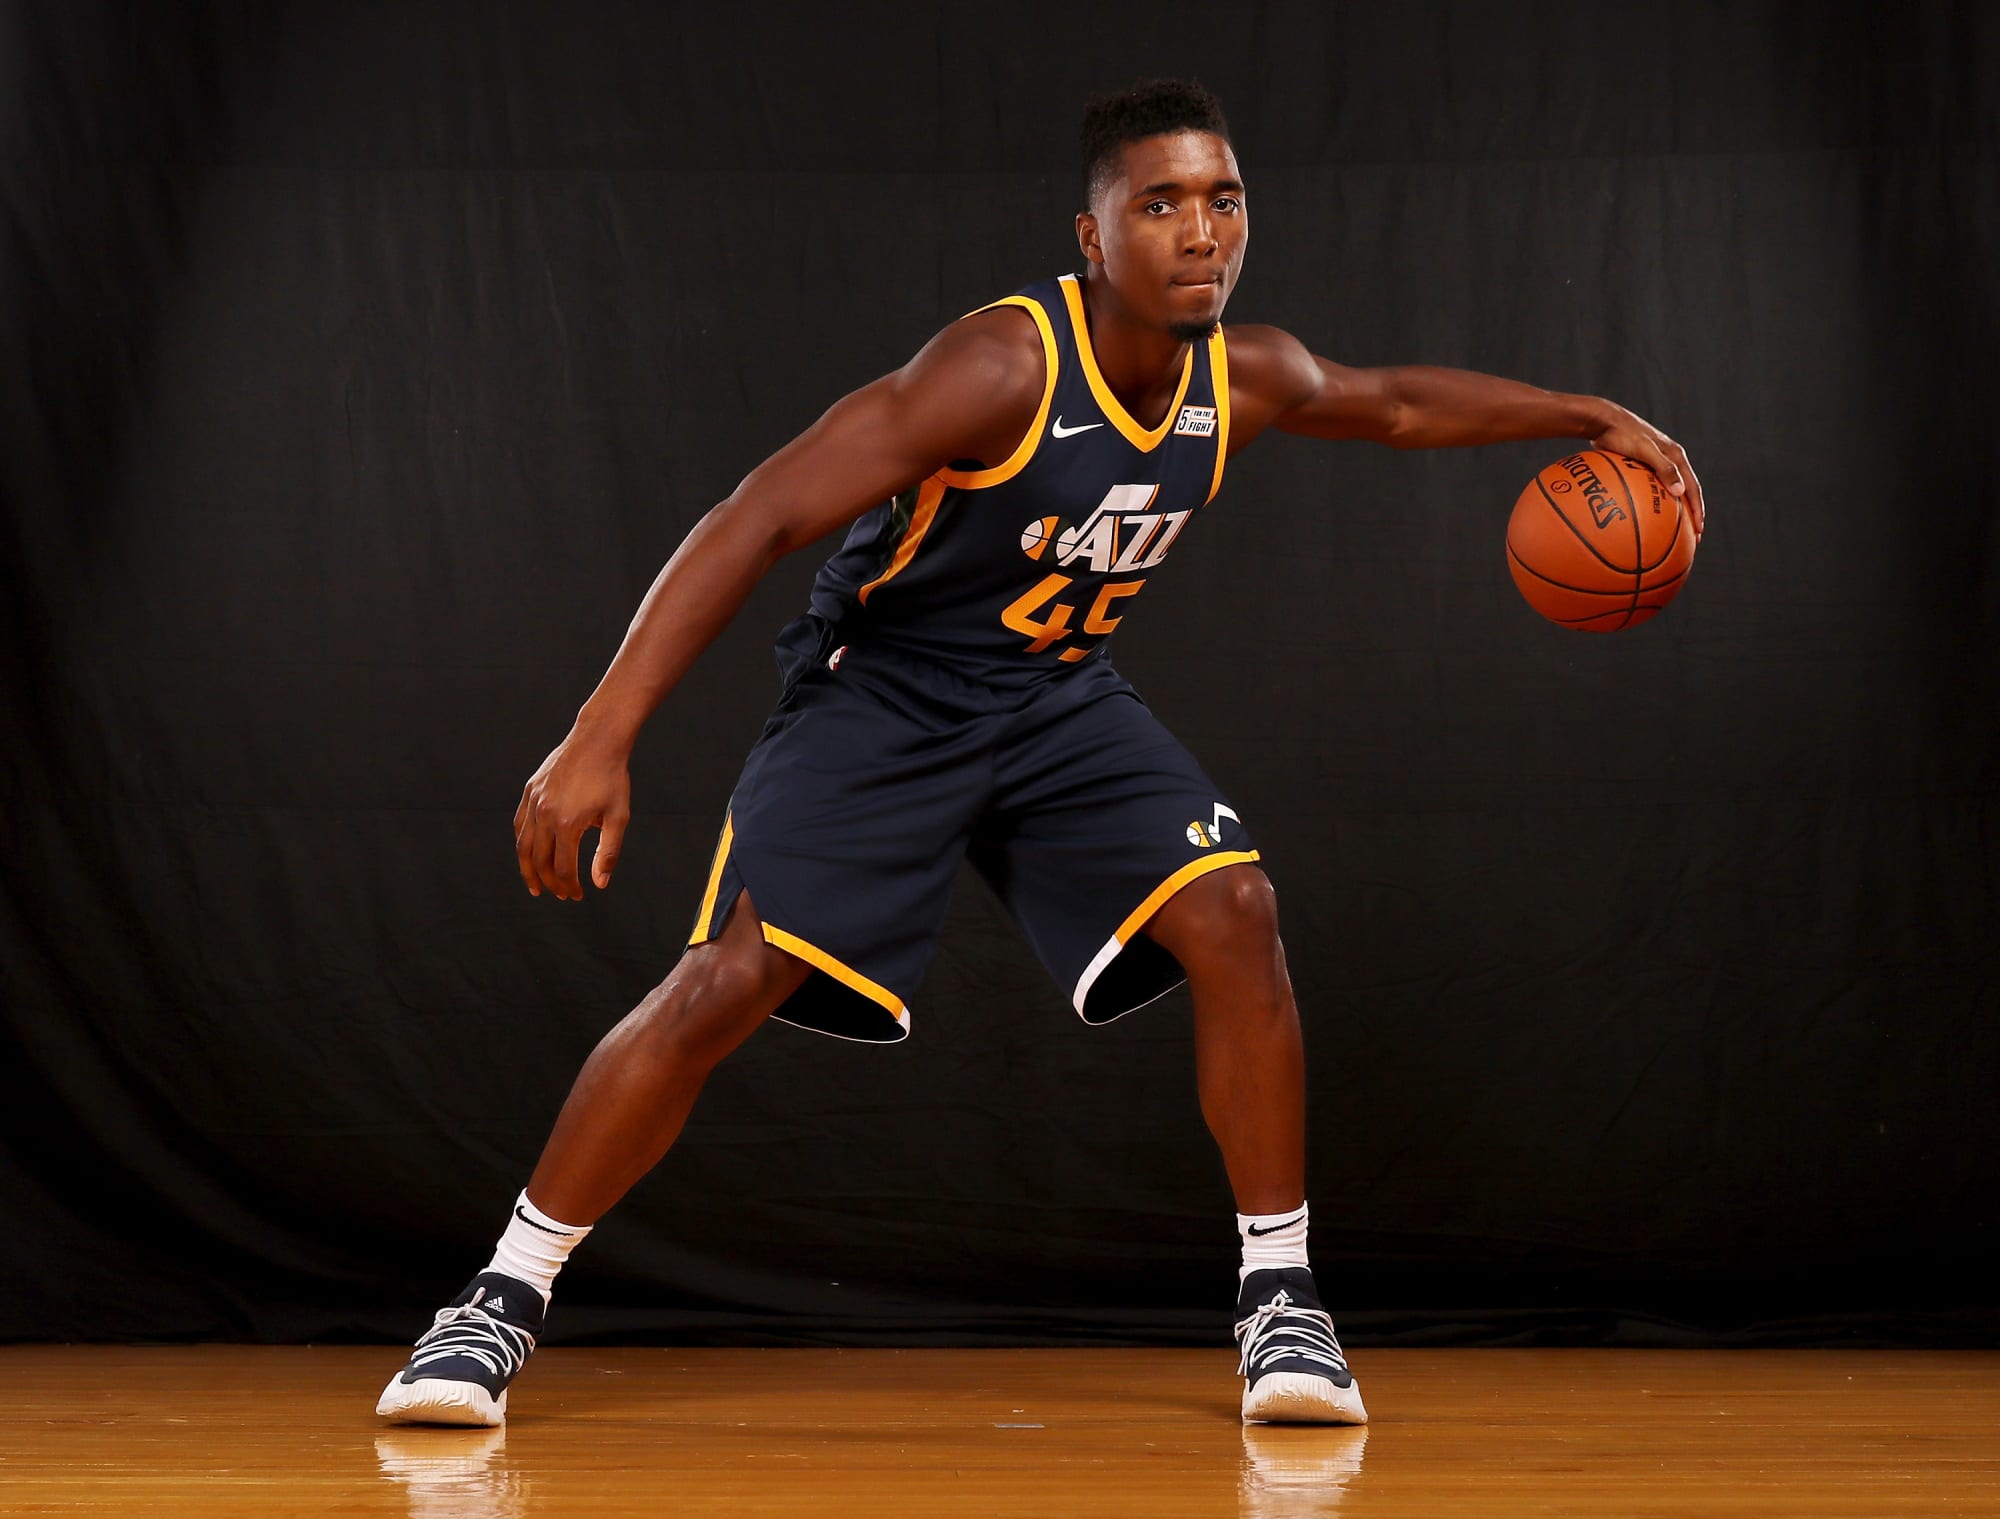 Instead of desired playoff appearance, Jazz might have found better prize  in hotshot rookie Donovan Mitchell - NBC Sports